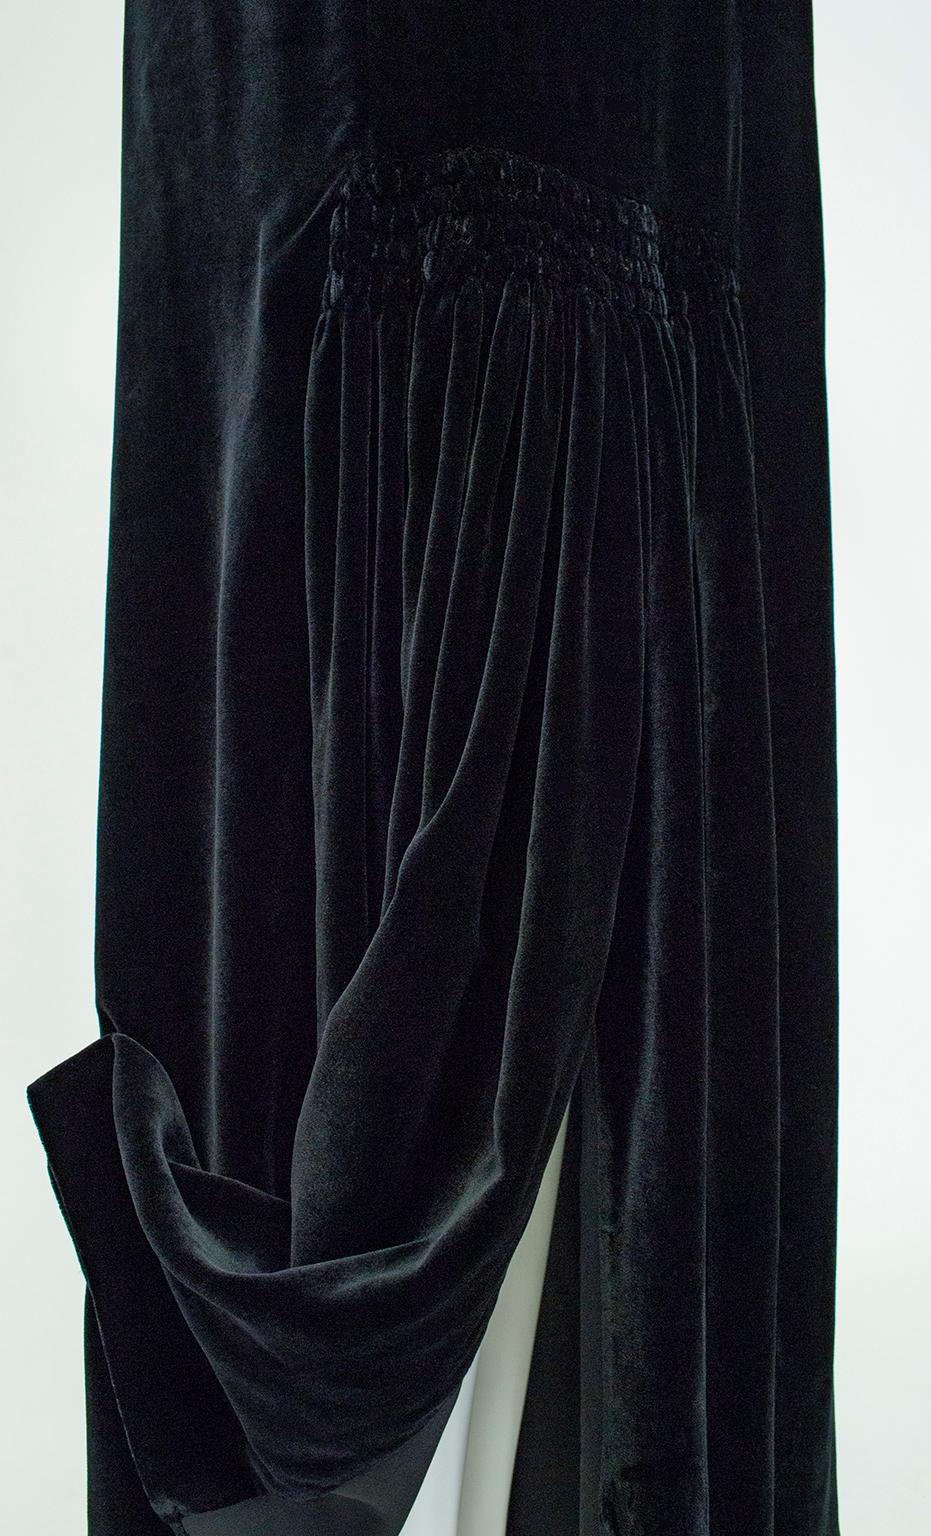 Aesthetic *Large Size* Black Velvet Ruff Collar Gown with Train - L-XL, 1930s 4